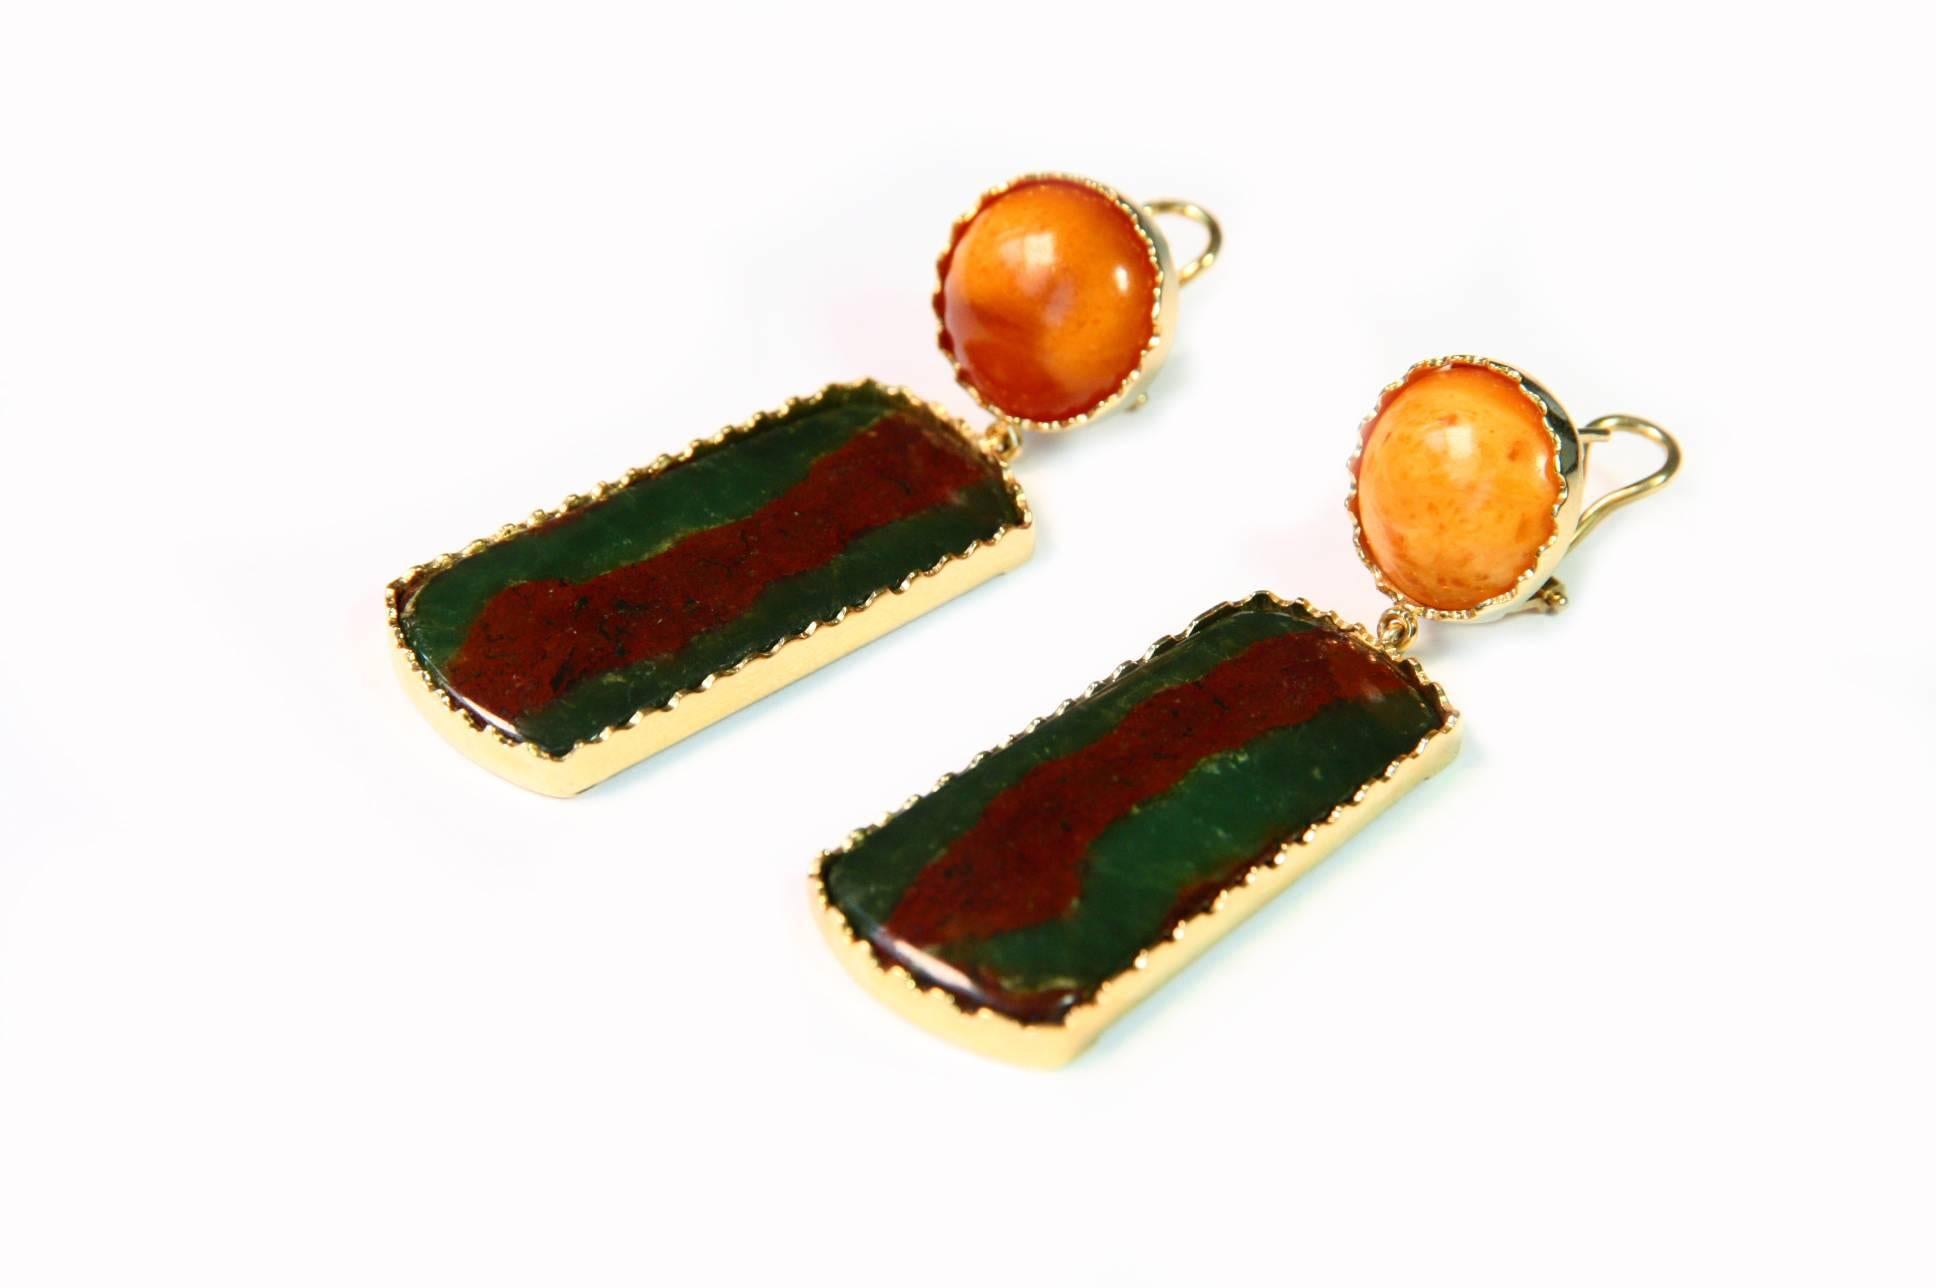 Marvalous earrings with cabochon amber and Picasso Jasper 18kt gold gr. 14,90. Total length 7 cm weight .....
All Giulia Colussi jewelry is new and has never been previously owned or worn. Each item will arrive at your door beautifully gift wrapped